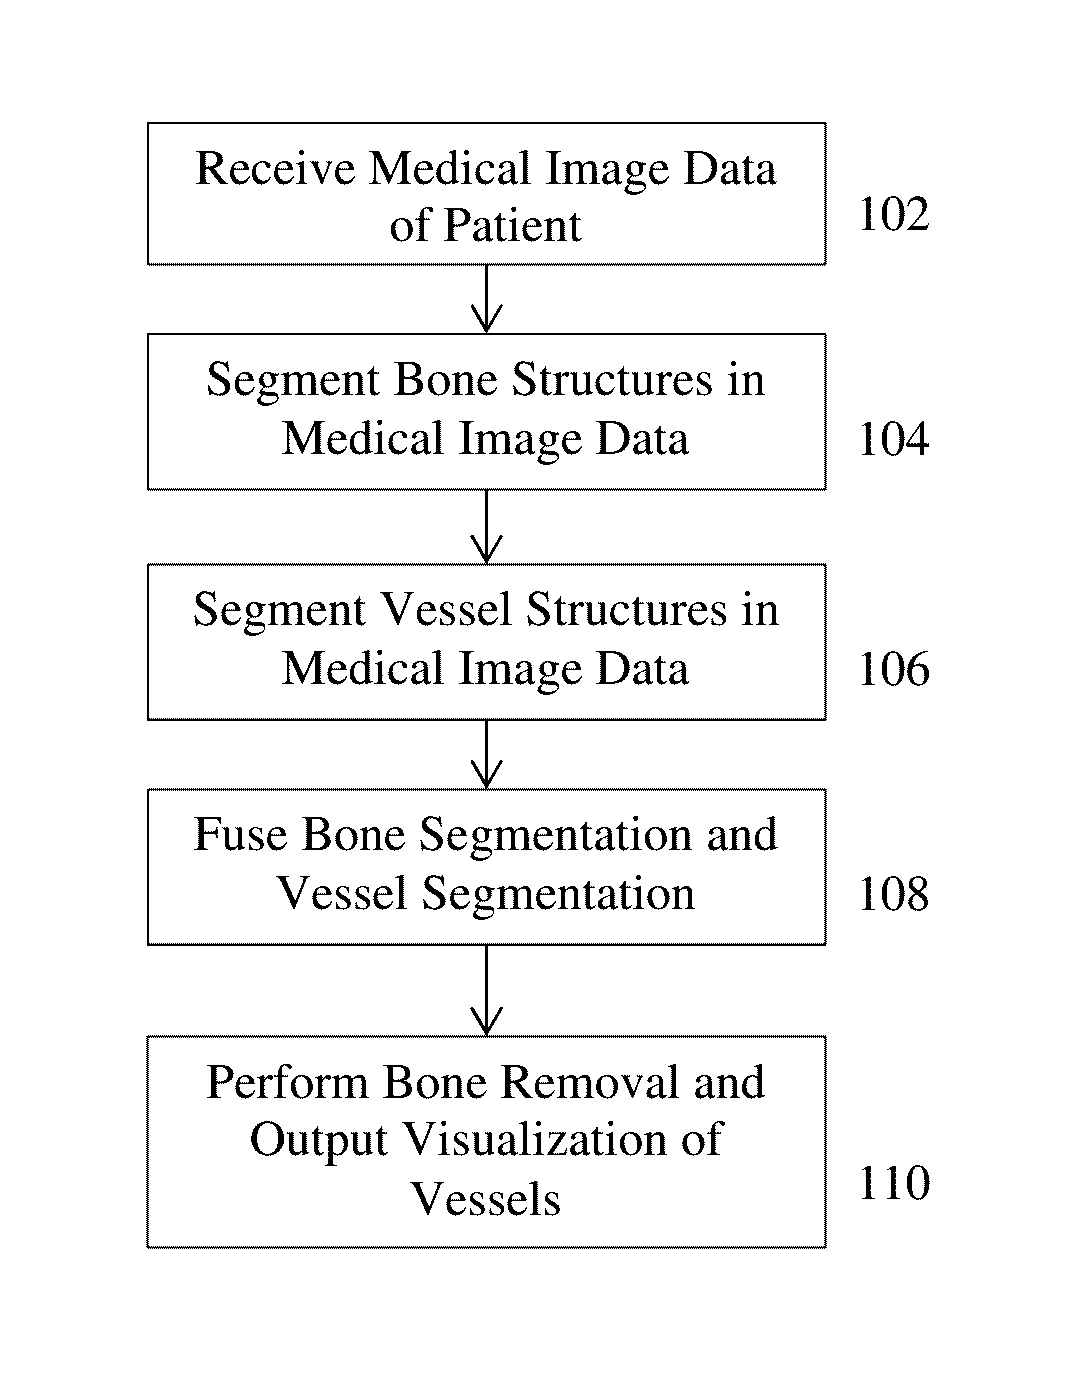 Method and System for Whole Body Bone Removal and Vascular Visualization in Medical Image Data